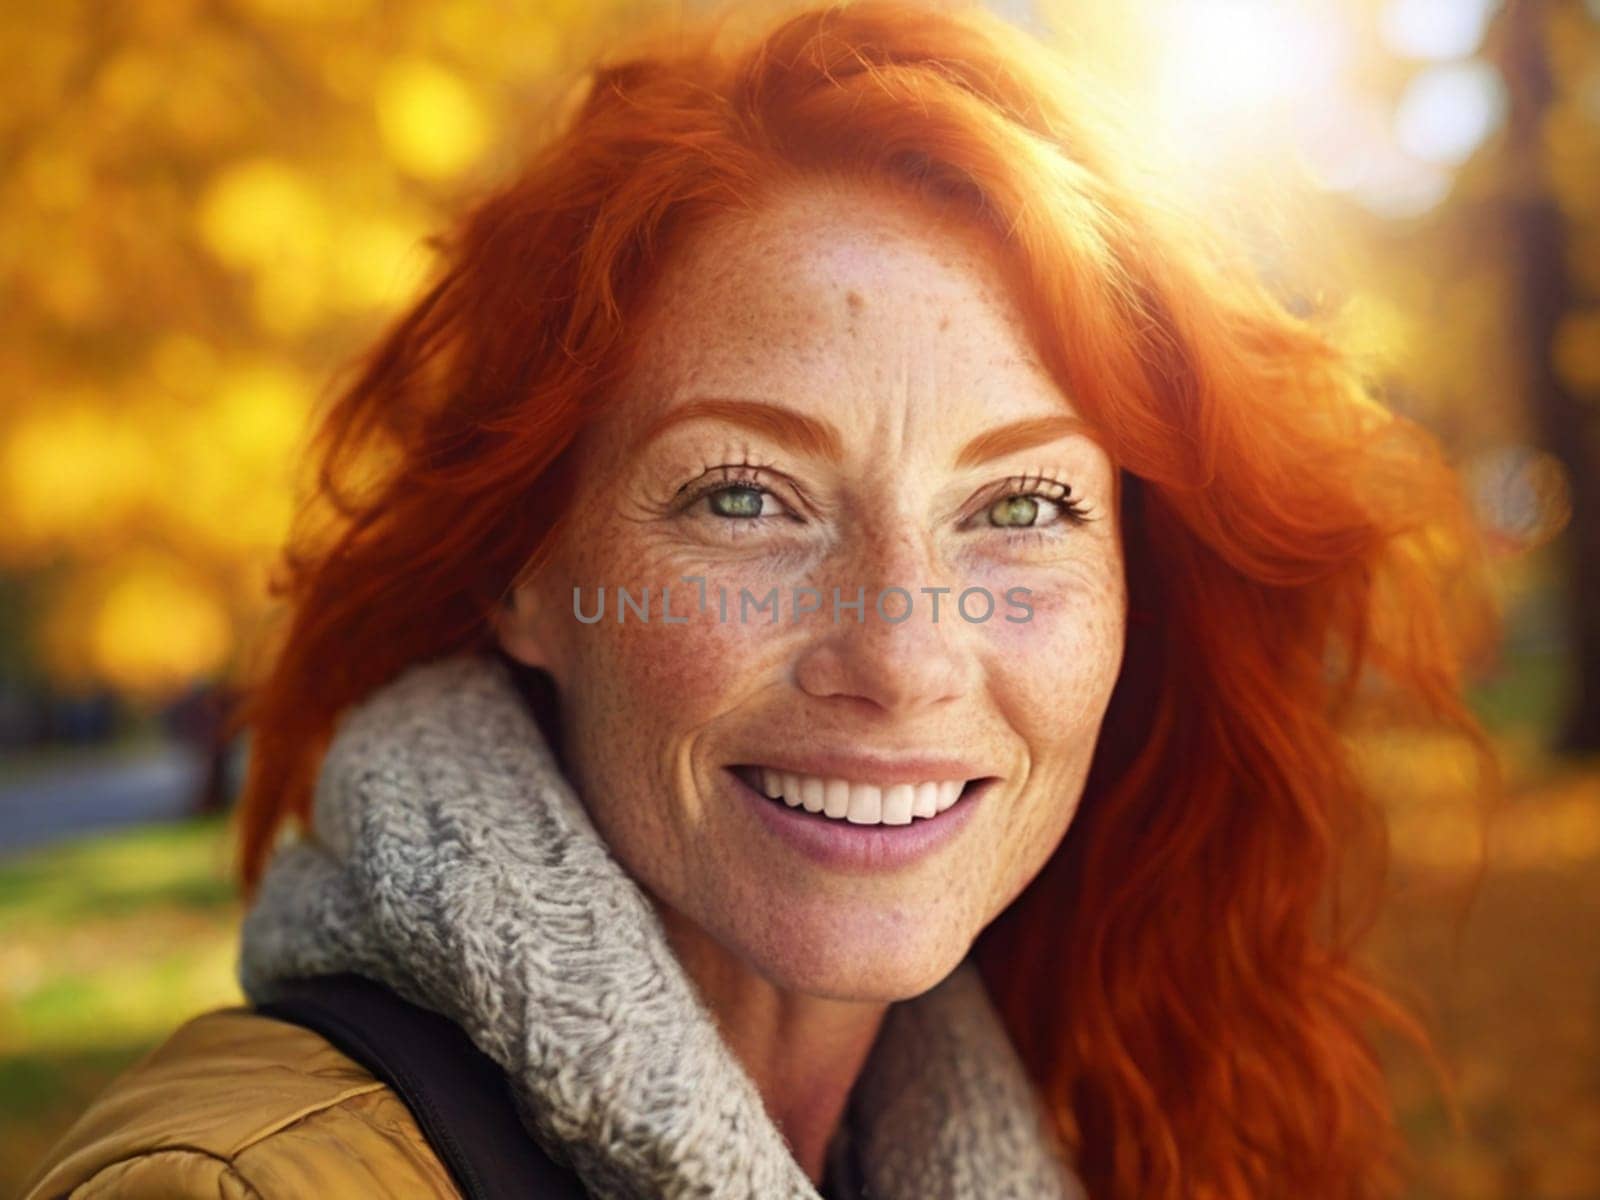 Portrait of a mature 45 year old happy redhead woman with freckles and long wavy hair in an autumn park with yellow foliage.